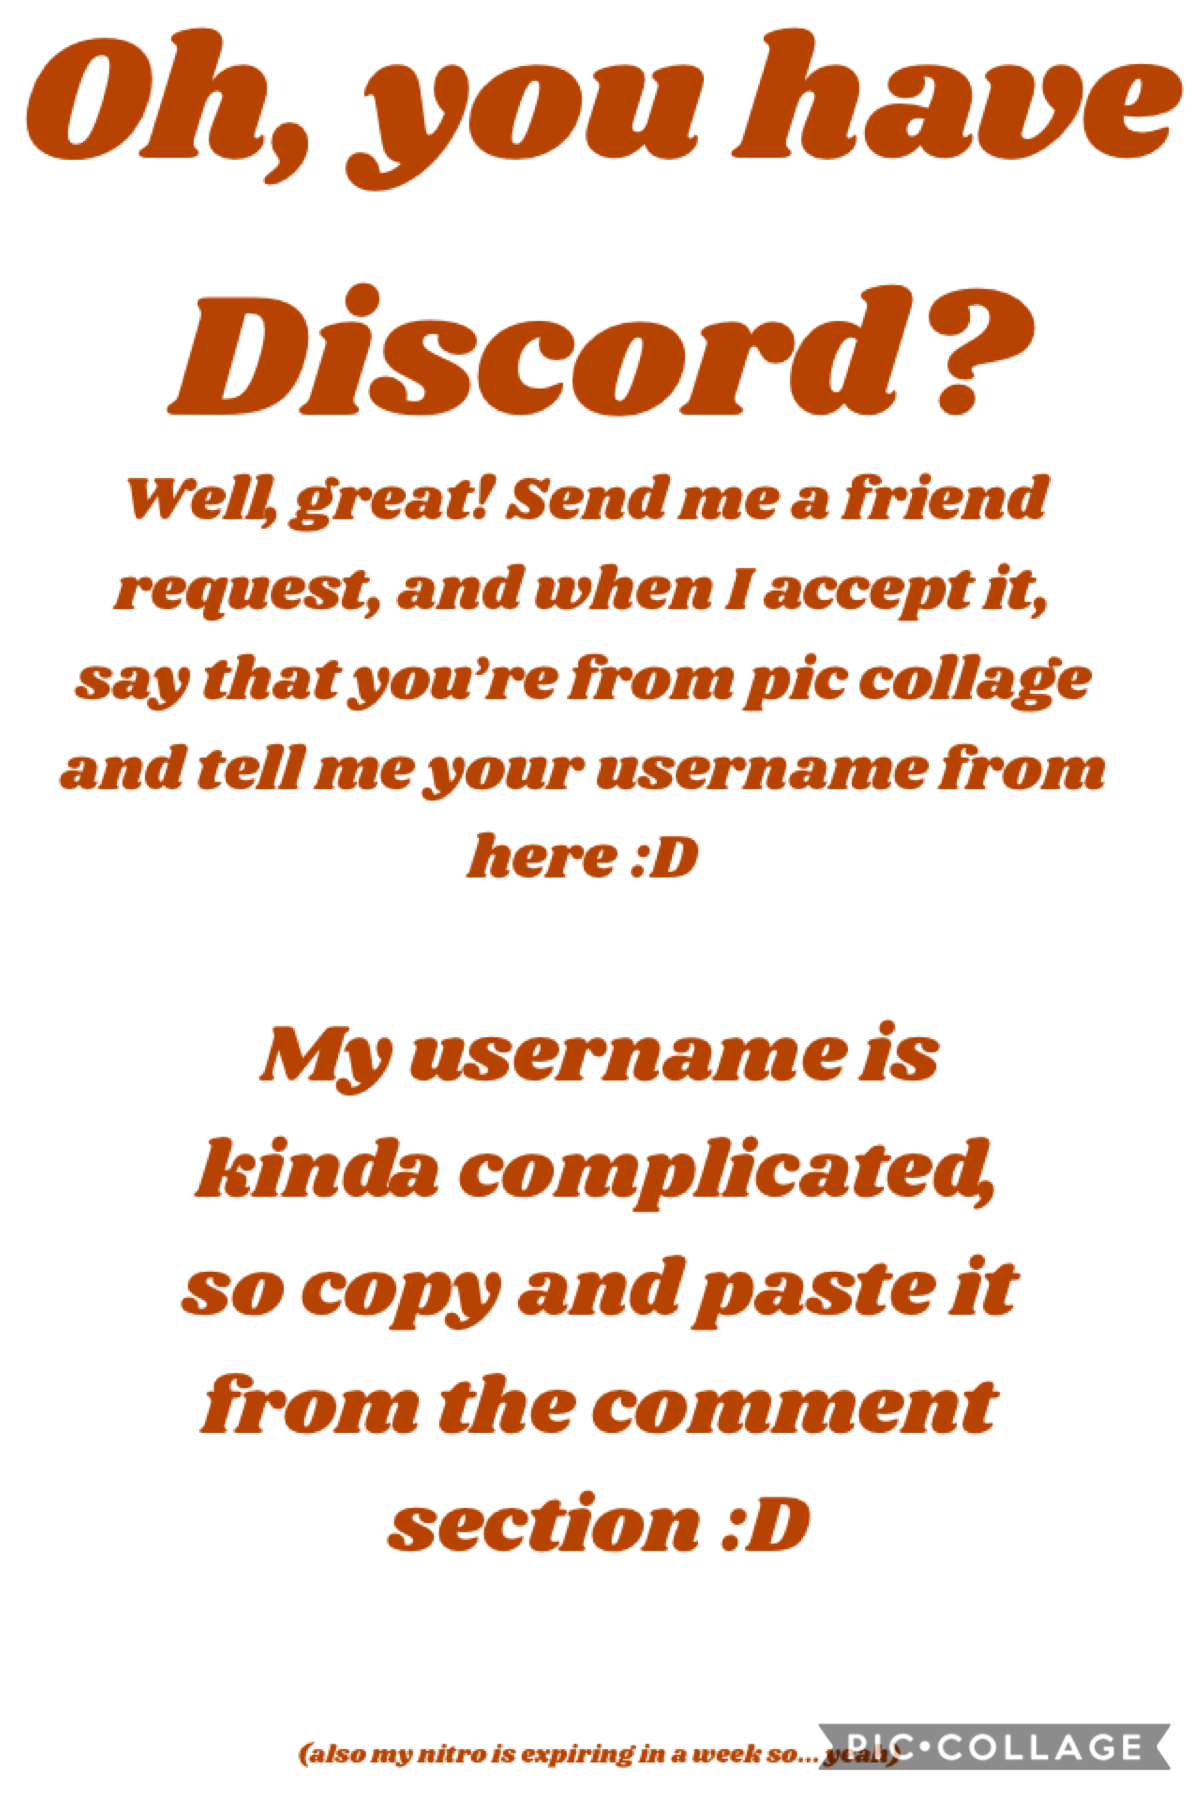 In the comment section is my username for discord